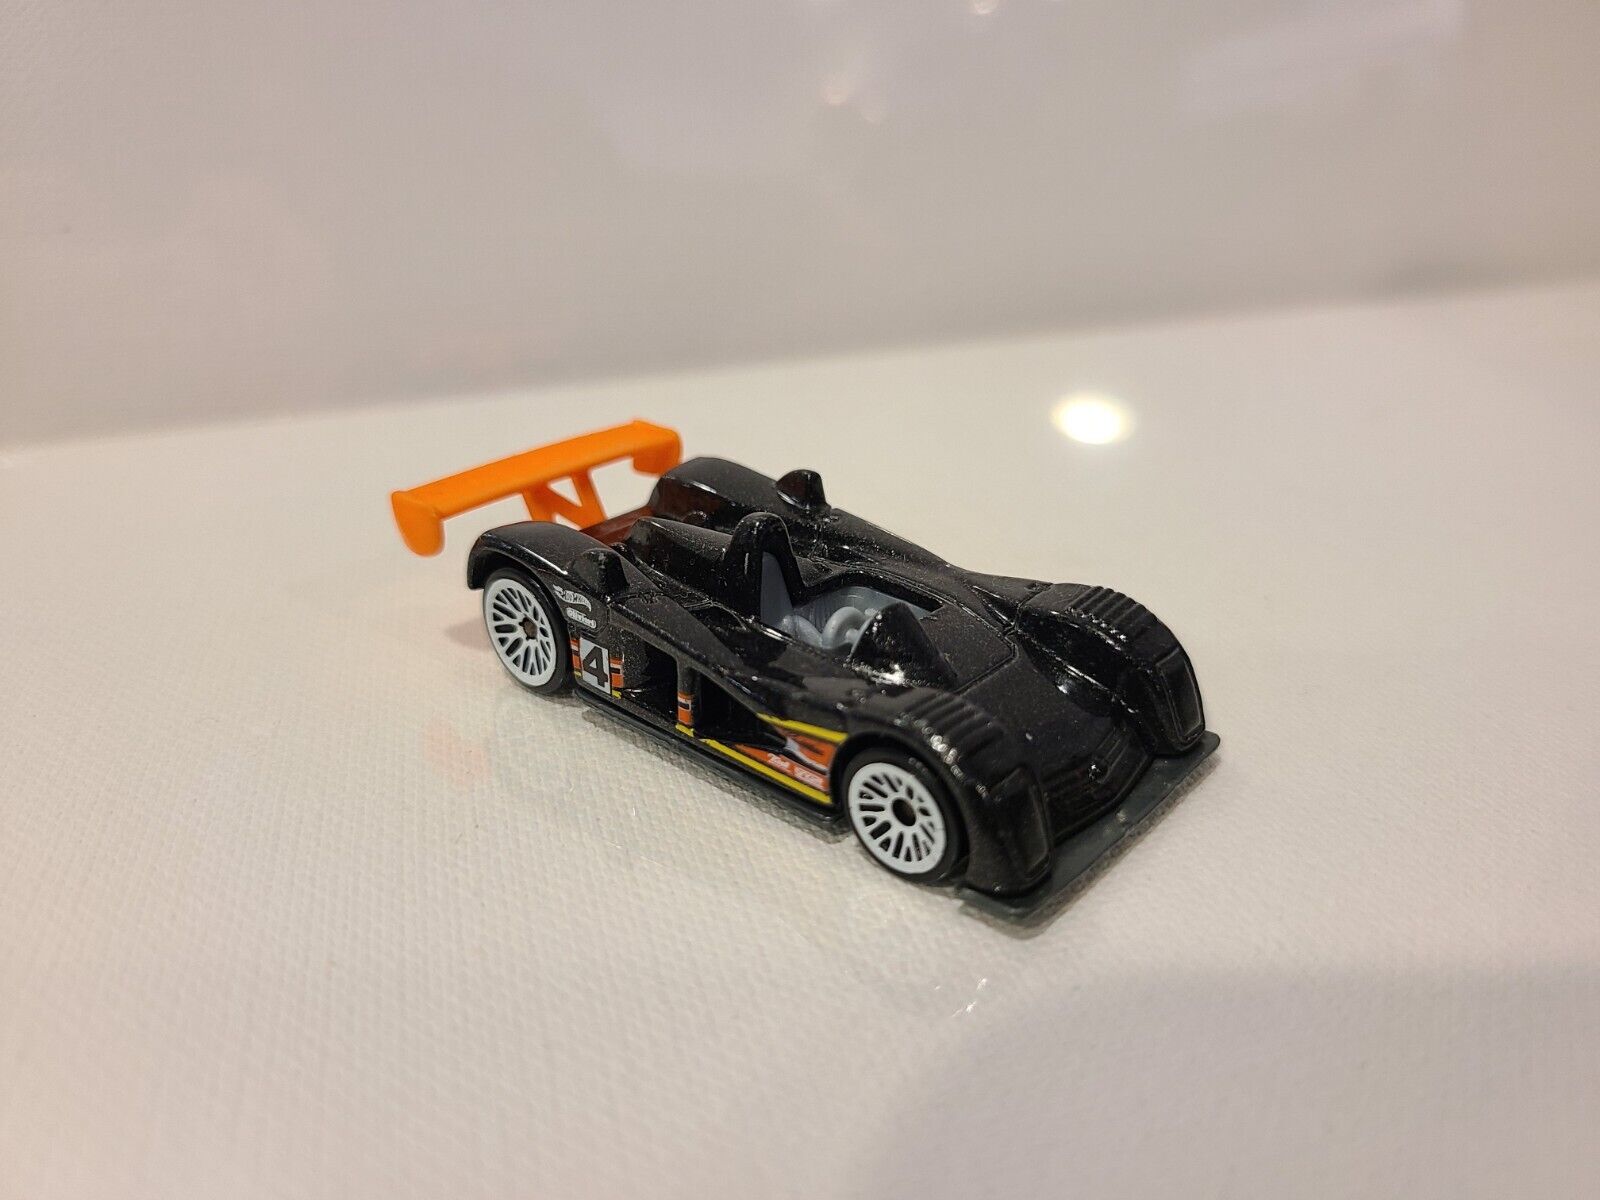 Loose hot wheels Cadillac sport racer black late 90s